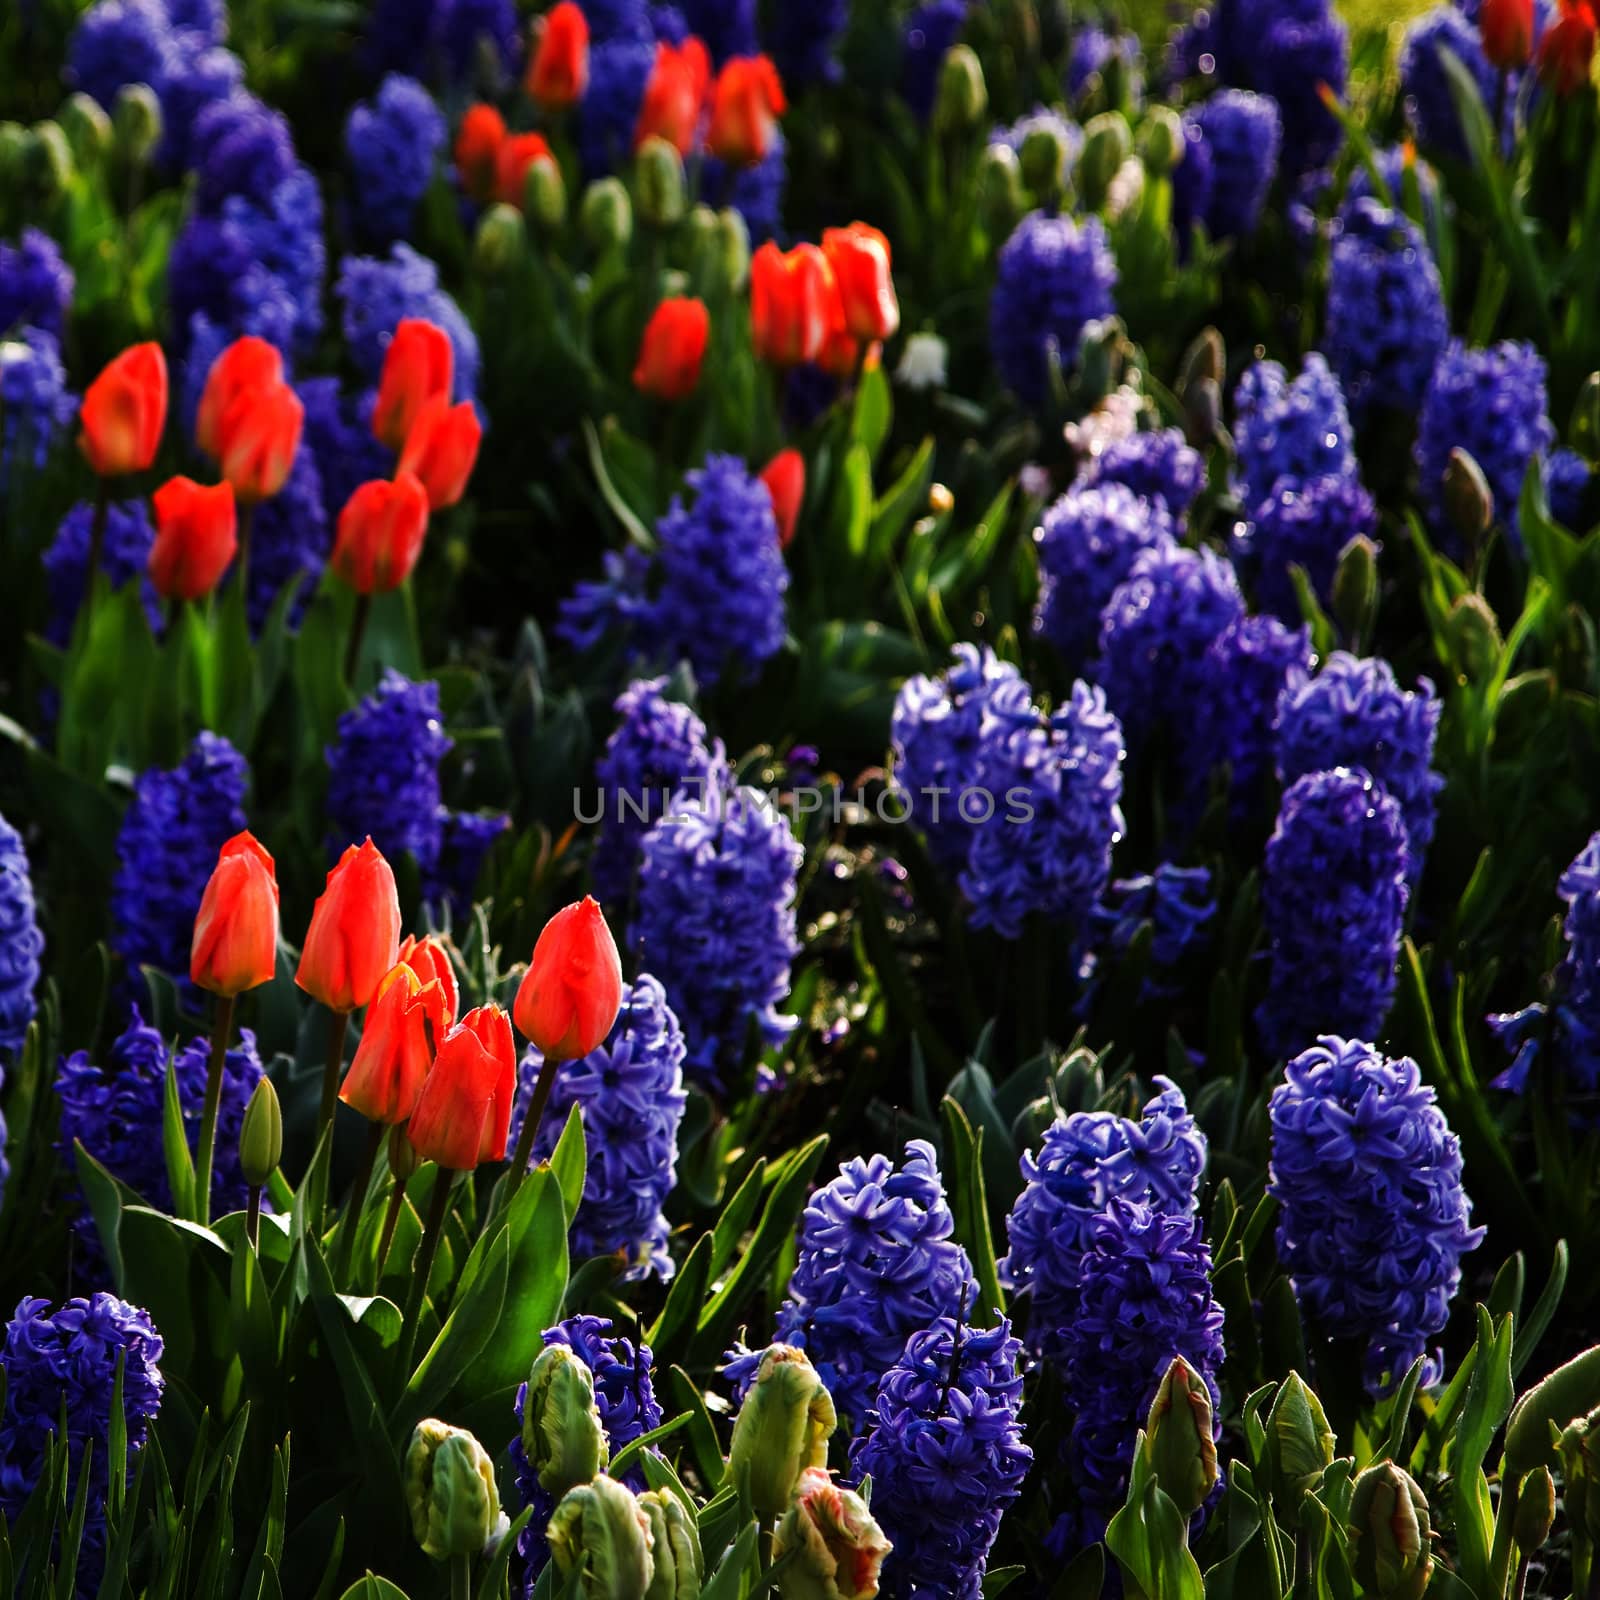 Orange tulips and blue hyacinths in spring by Colette